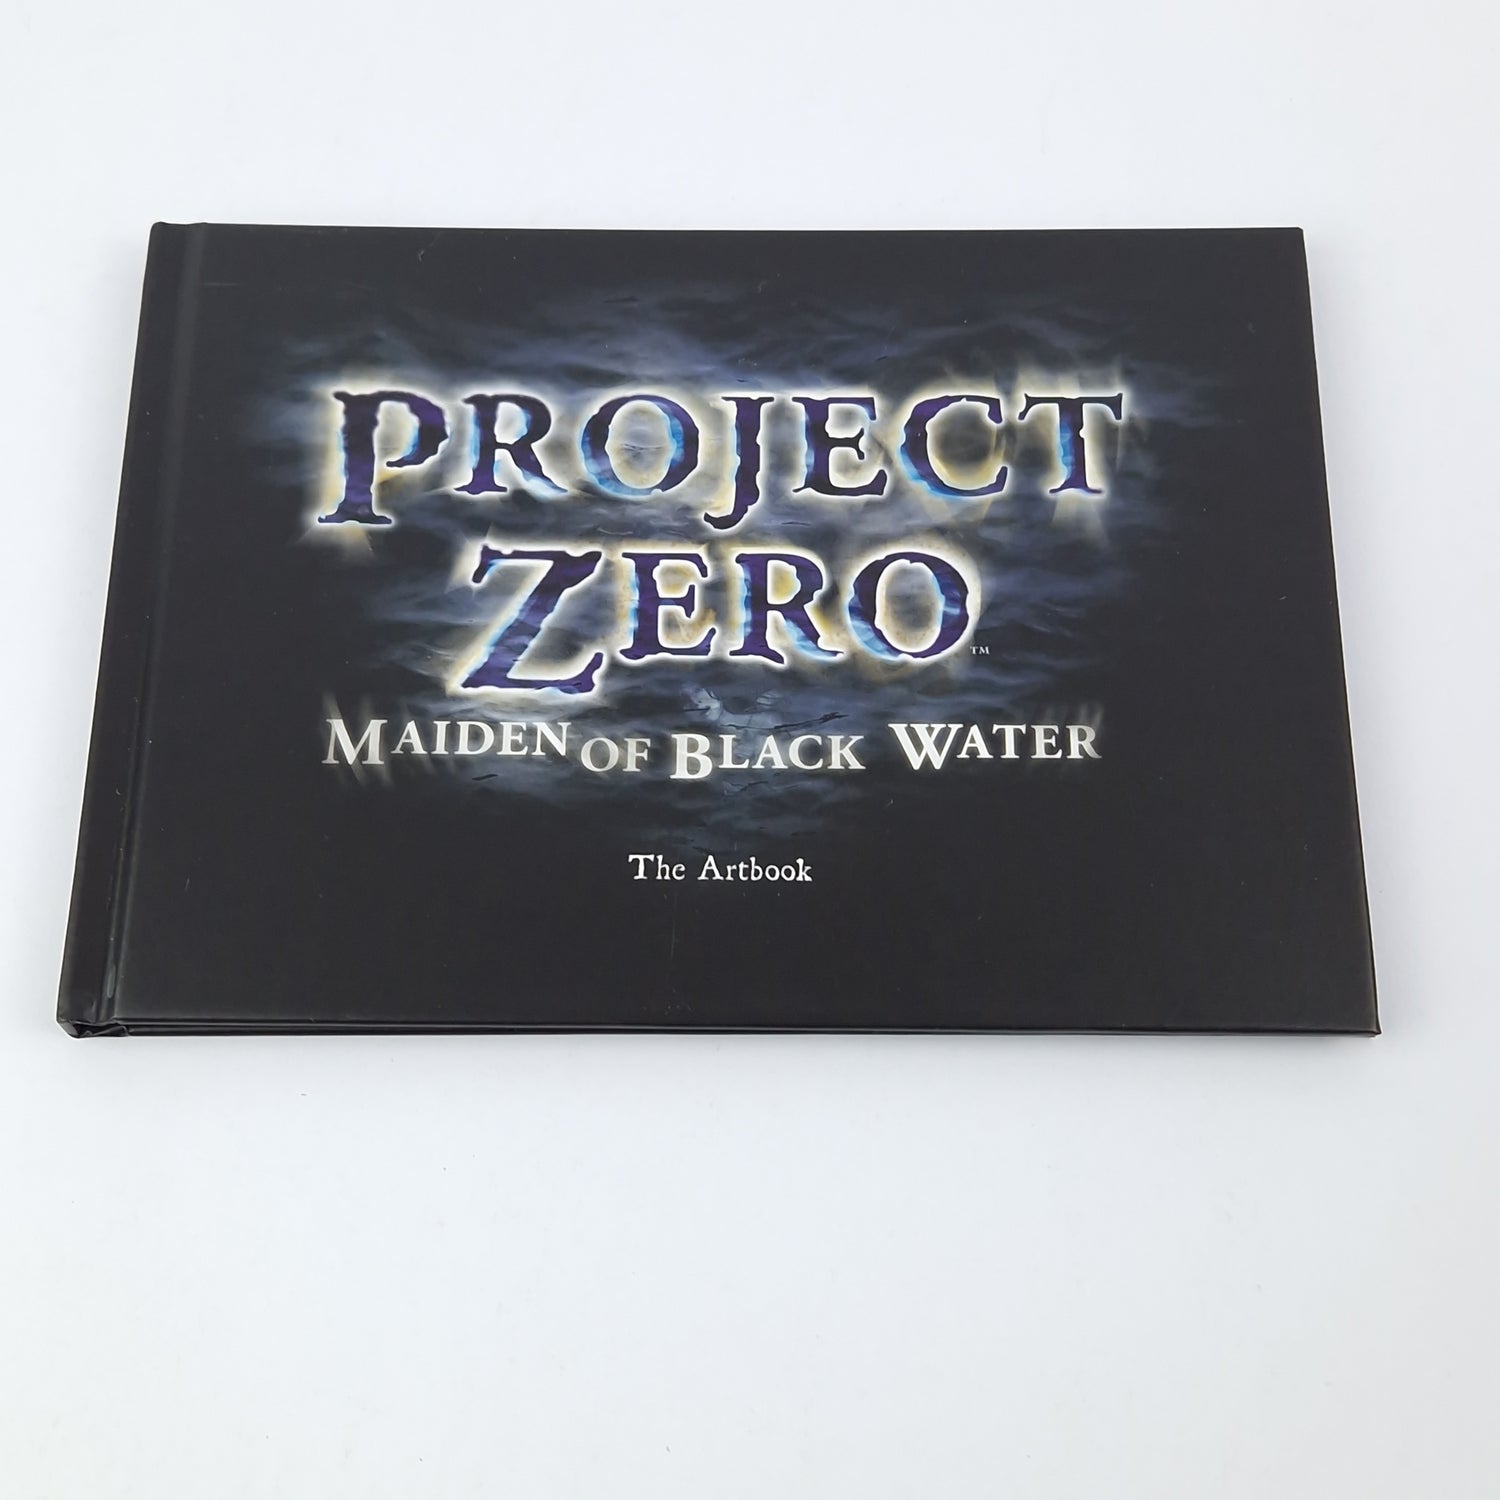 Nintendo Wii U game: Project Zero Maiden of Black Water Limited Edition - original packaging